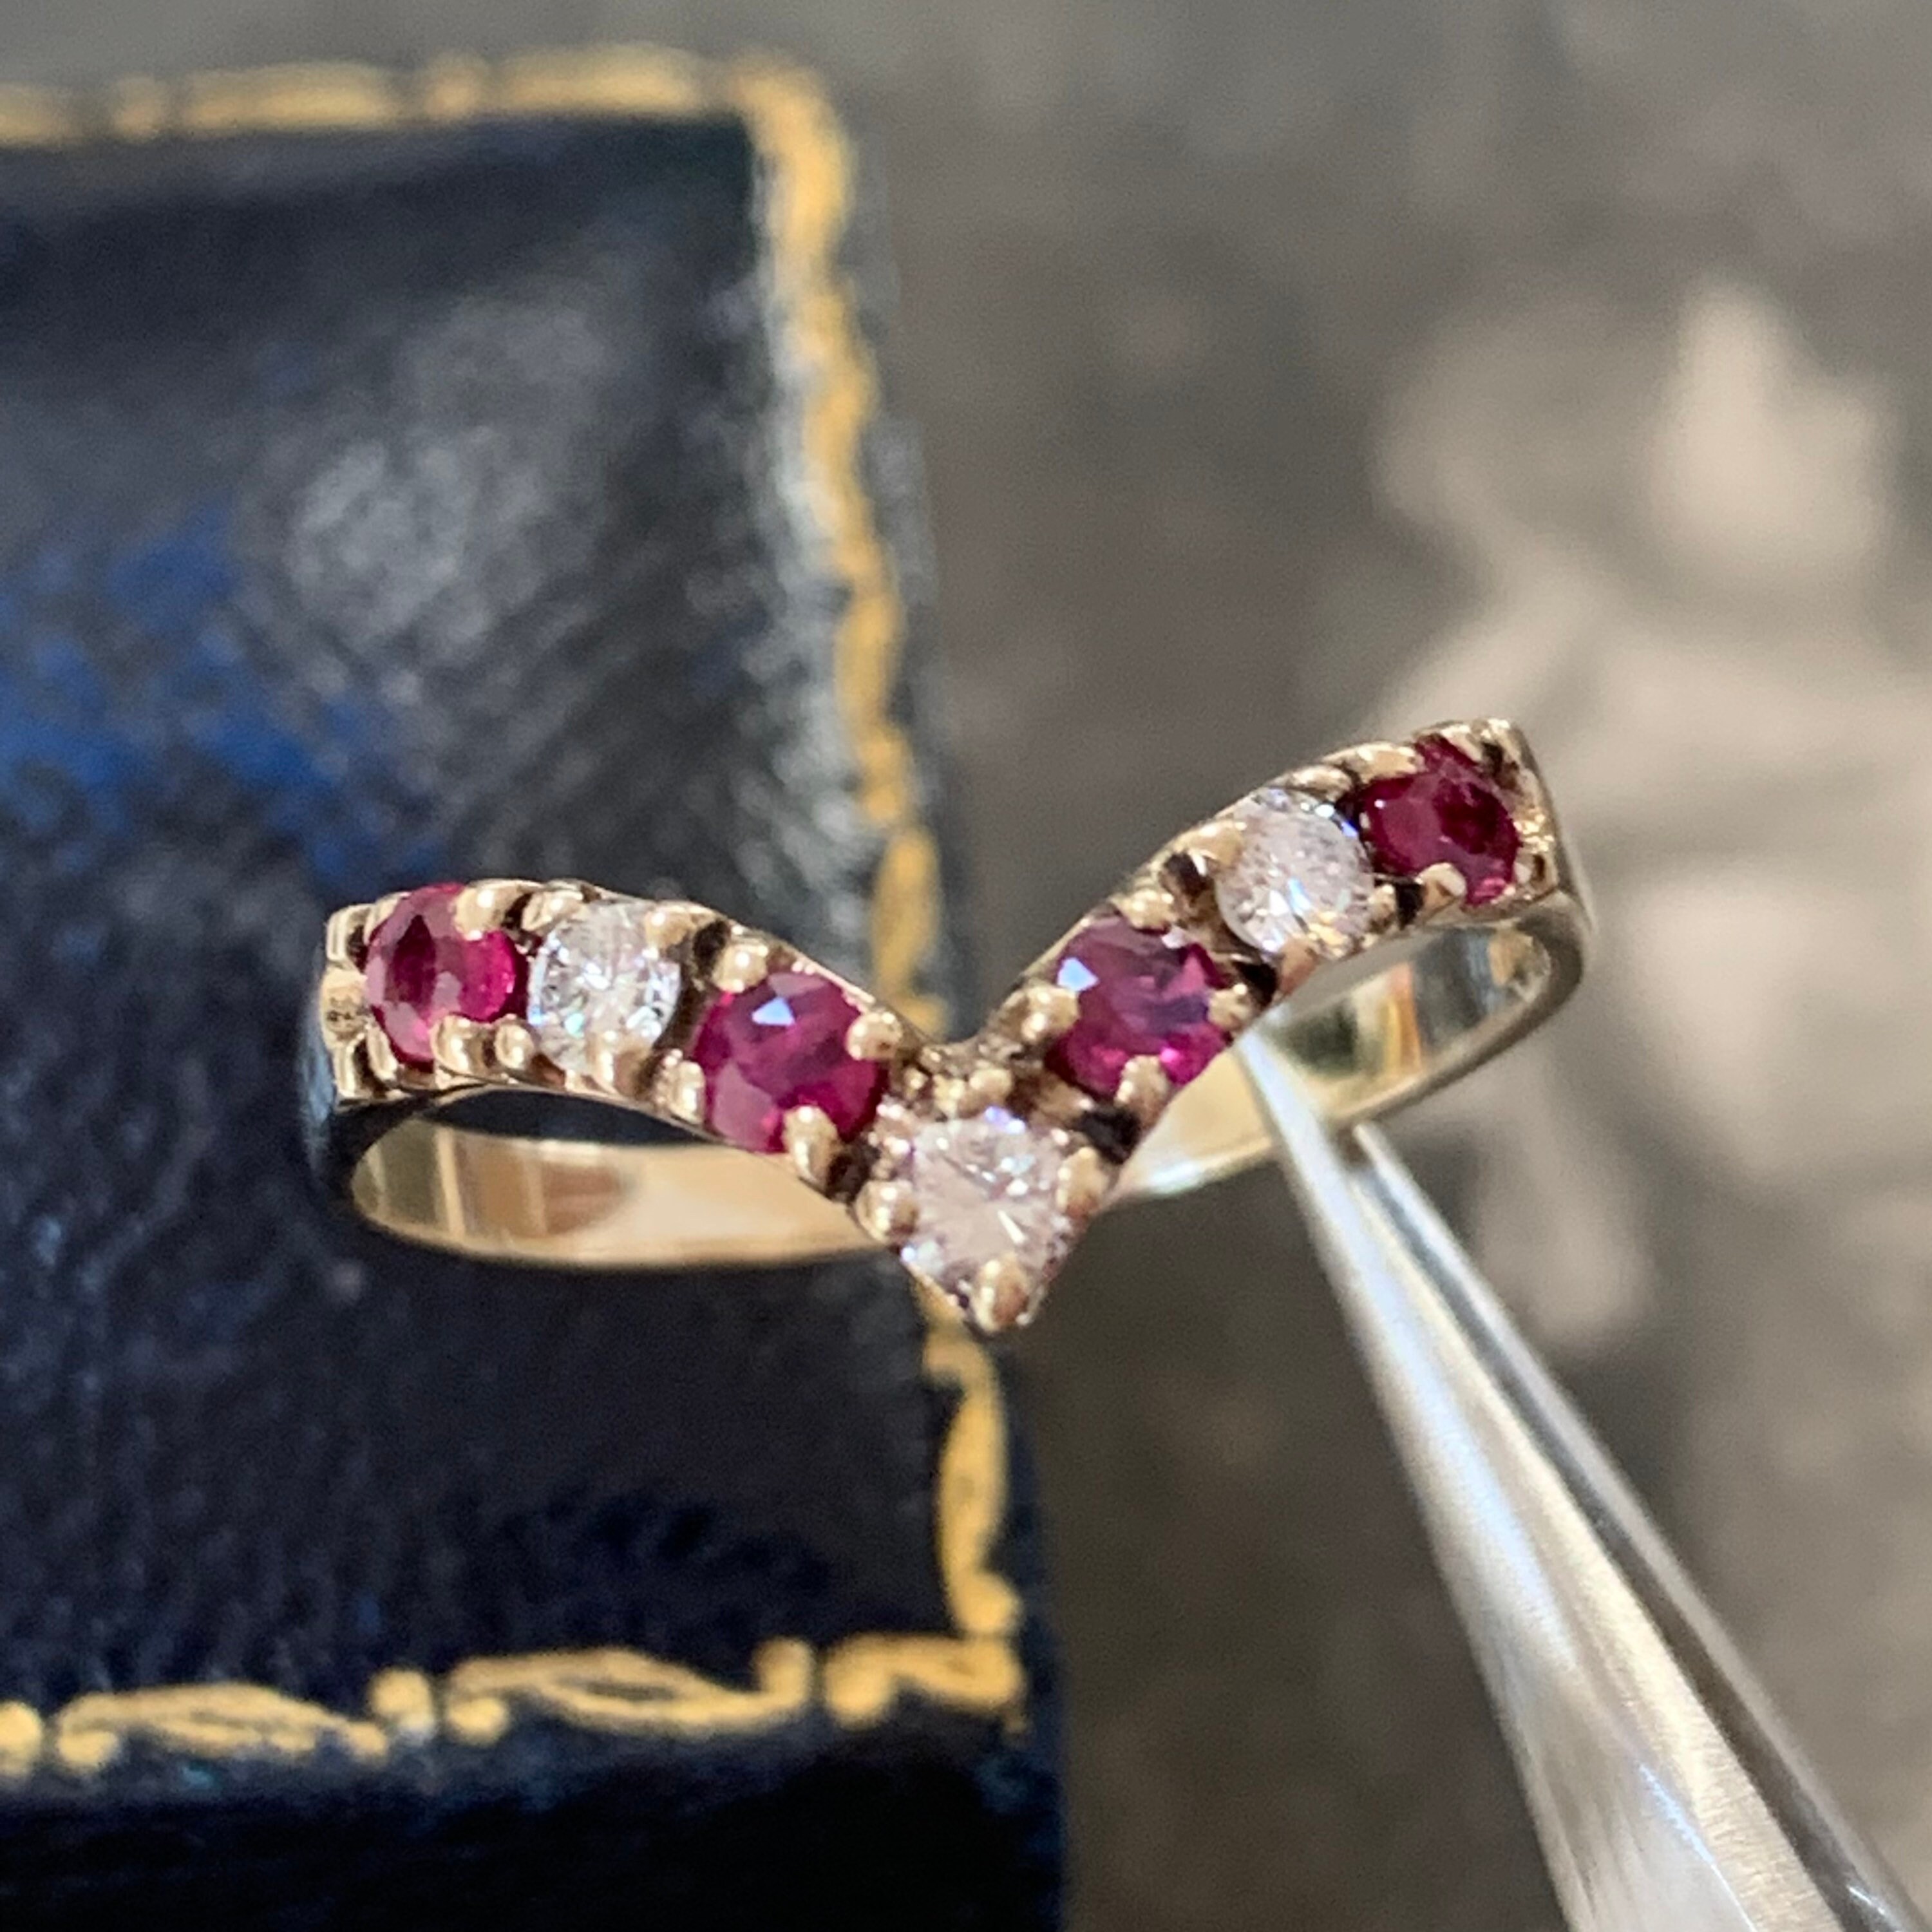 Vintage Wedding Or Engagement Ring in 18Ct Gold Set With Ruby & Diamonds Full English Hallmarks. Lovely Quality Piece